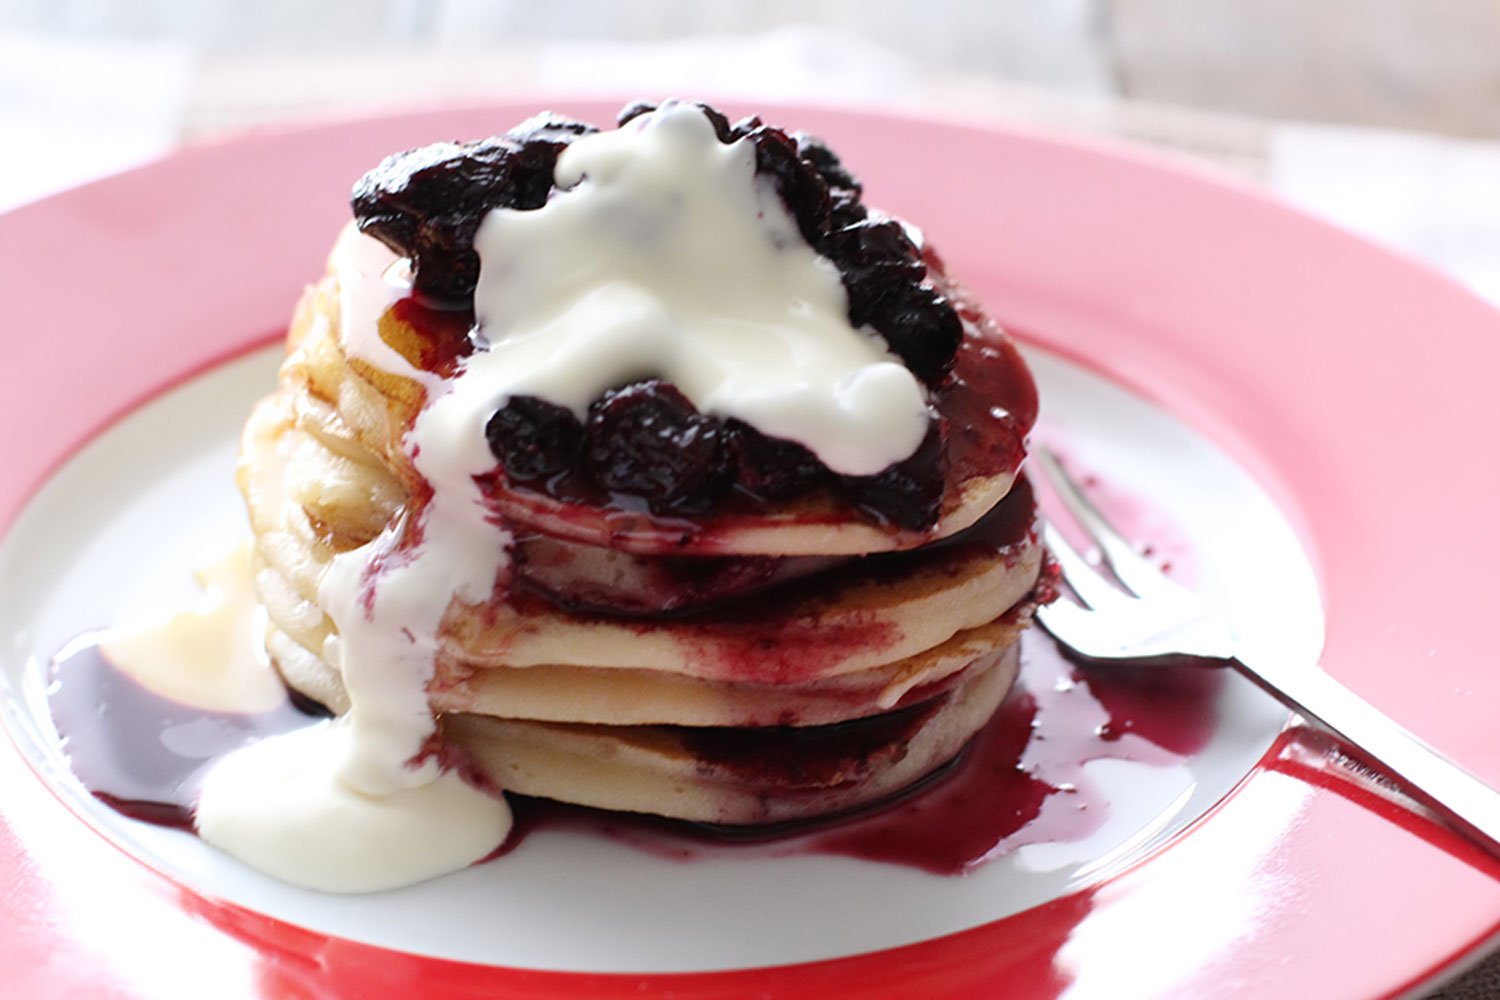 Recipe for fluffy ricotta pancakes, fresh blueberry compote, and decadent chantilly cream